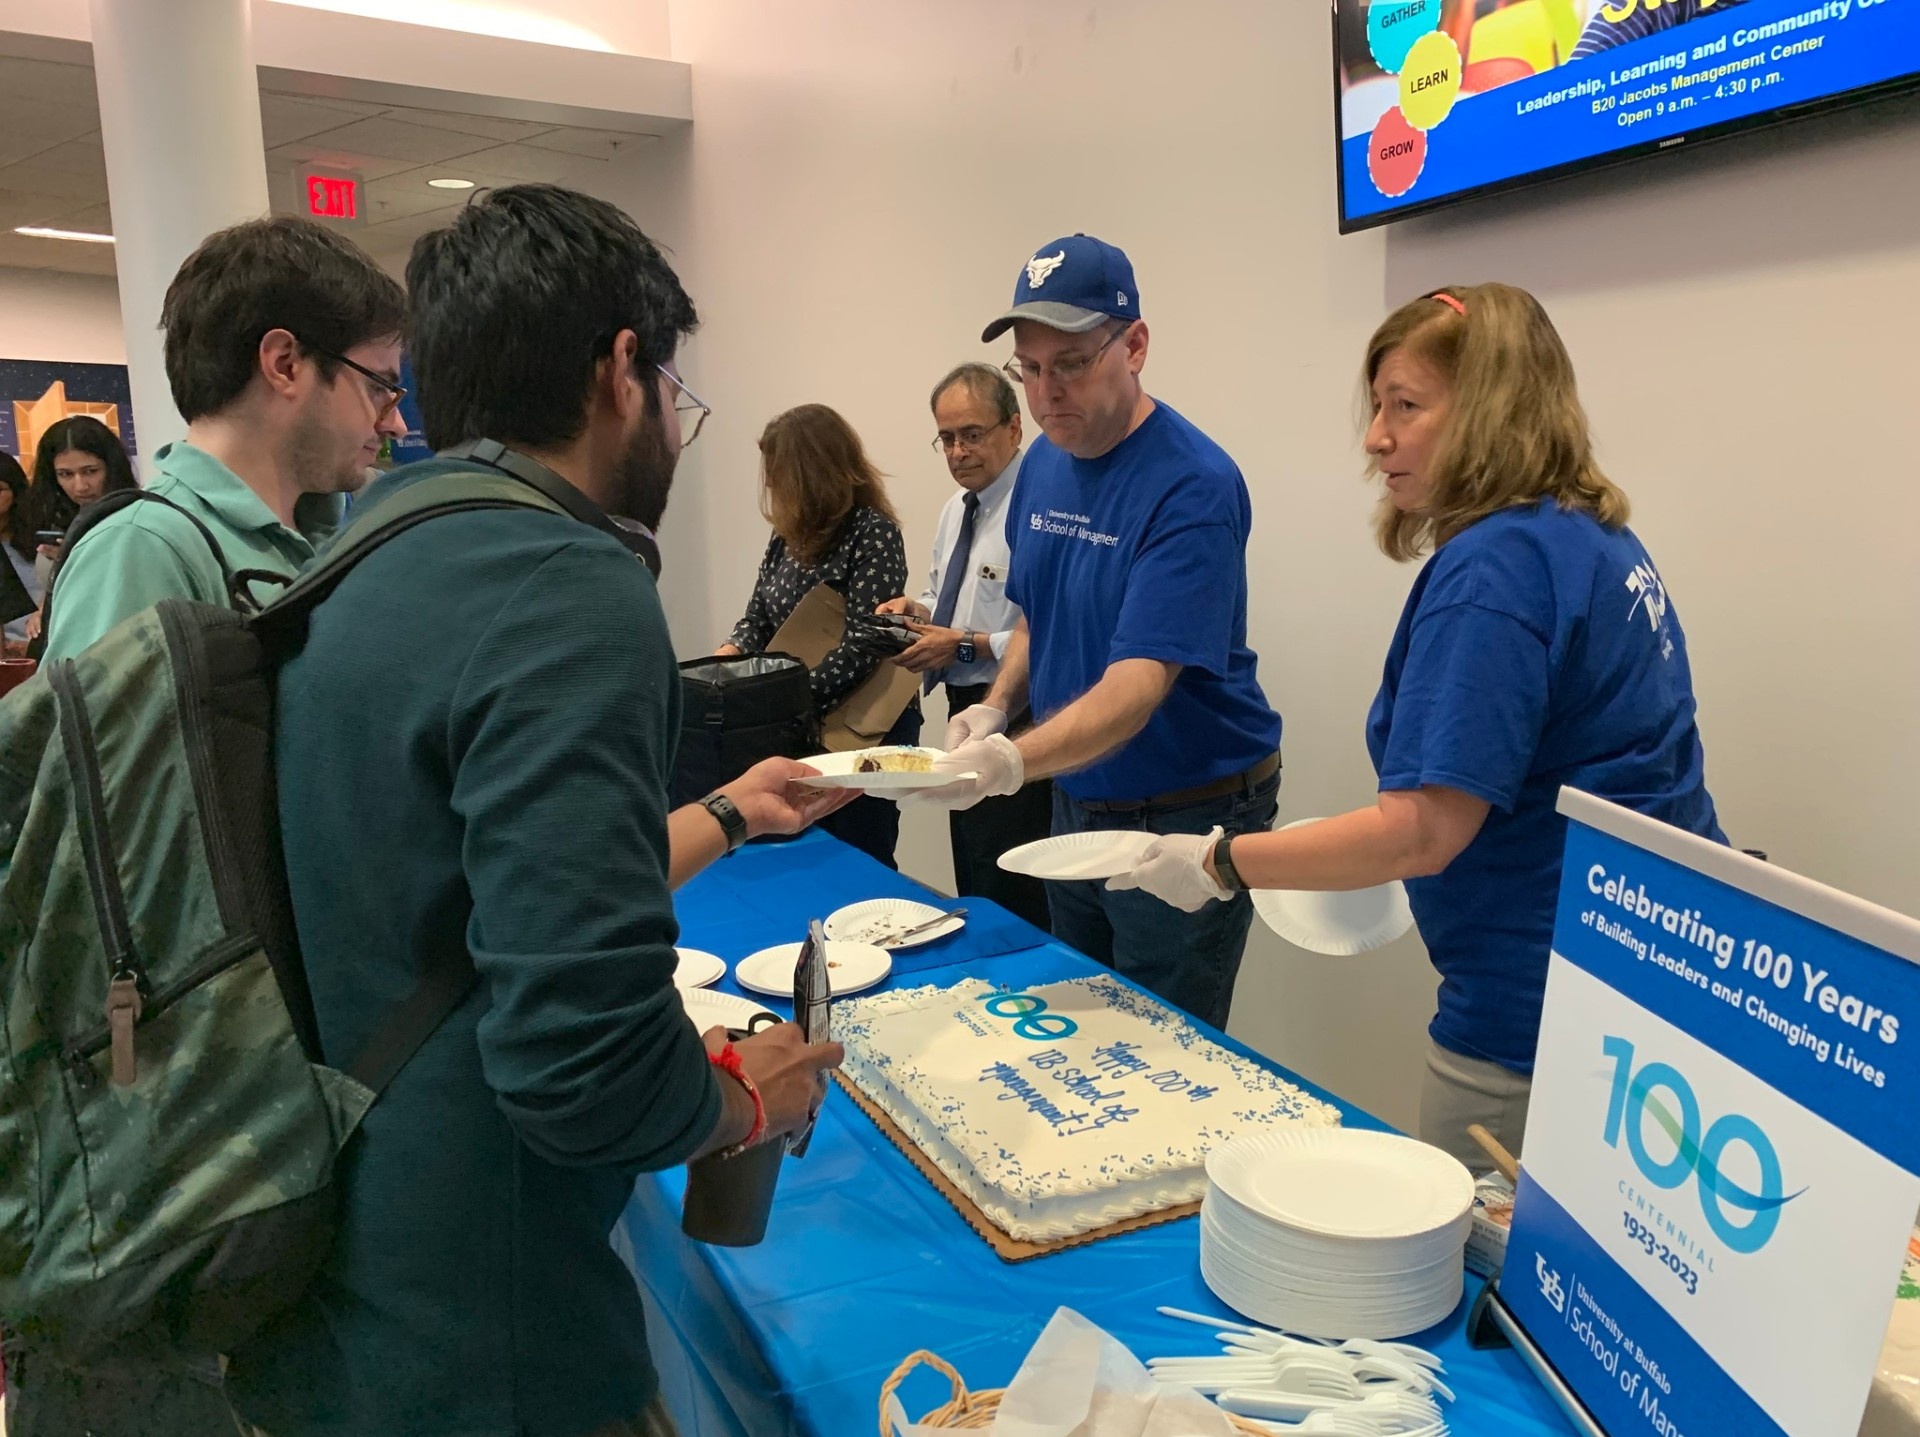 Zoom image: Associate deans Natalie Simpson, Dave Murray and Nallan Suresh handed out cake and ice cream to students.